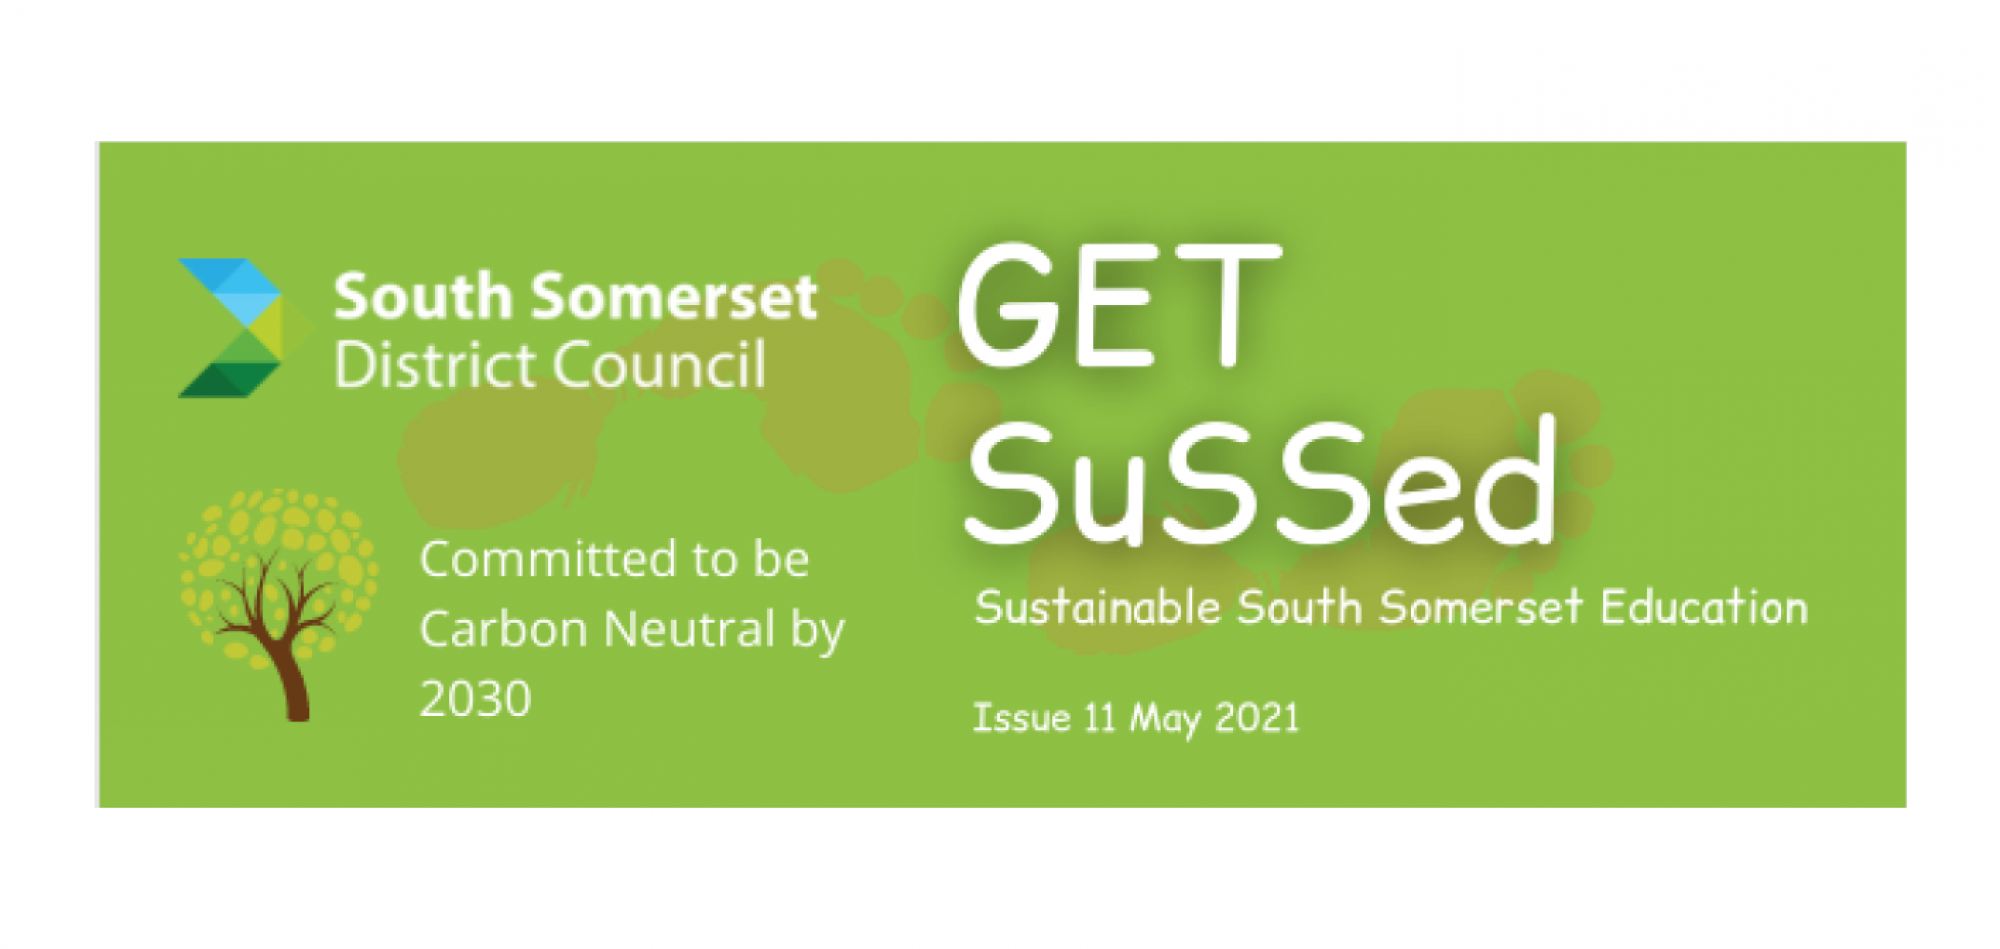 💚Get SuSSed! Latest environment news from South Somerset District Council💚